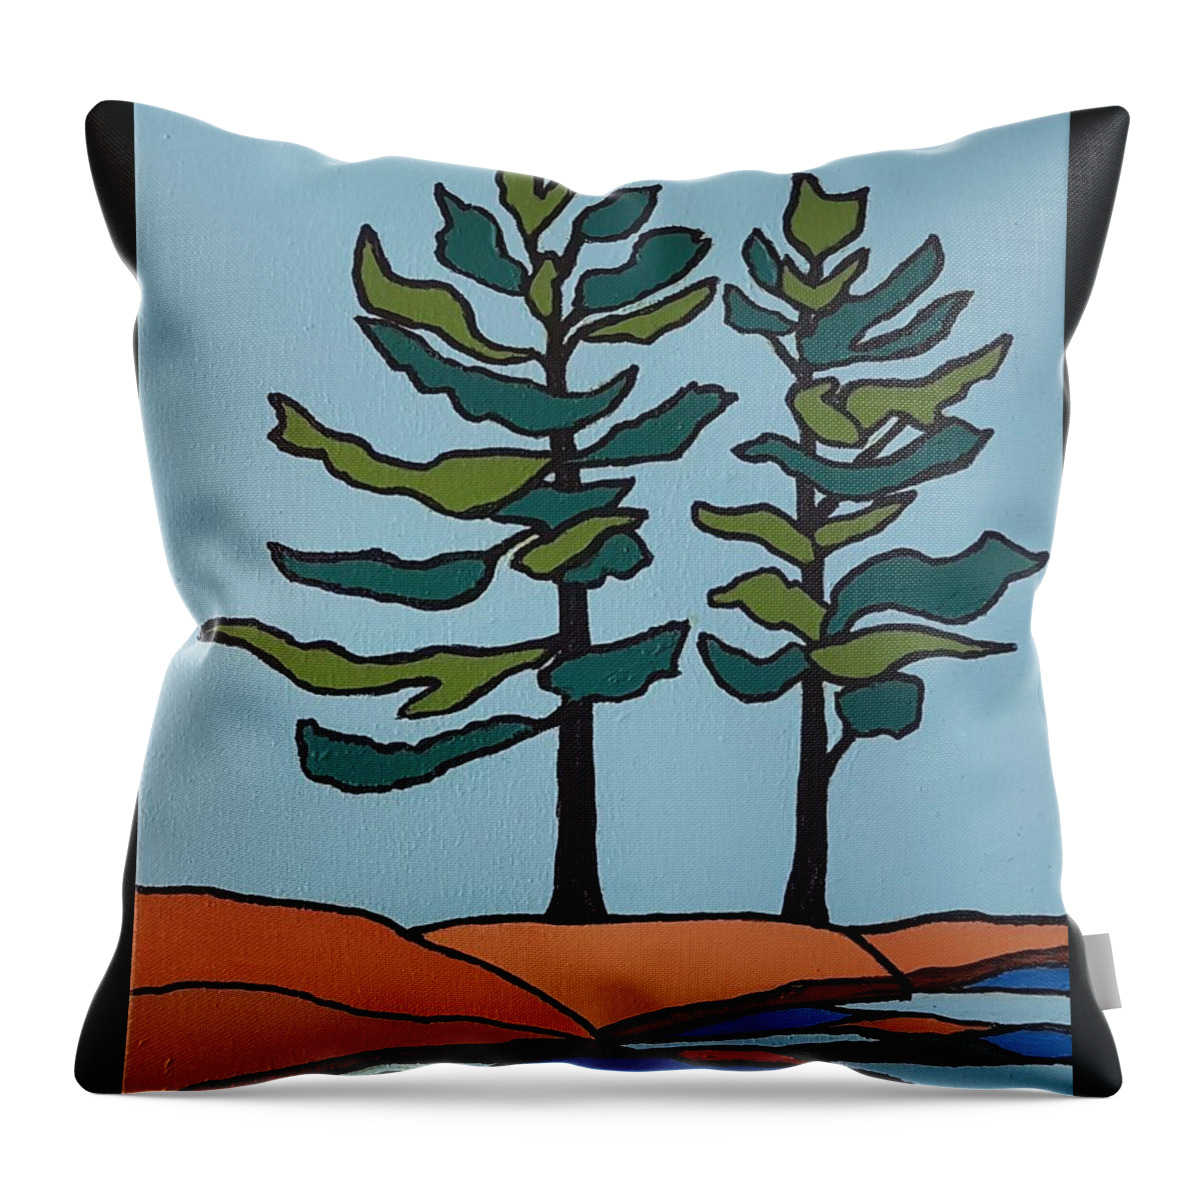 Landscape Throw Pillow featuring the painting Sisters by Petra Burgmann